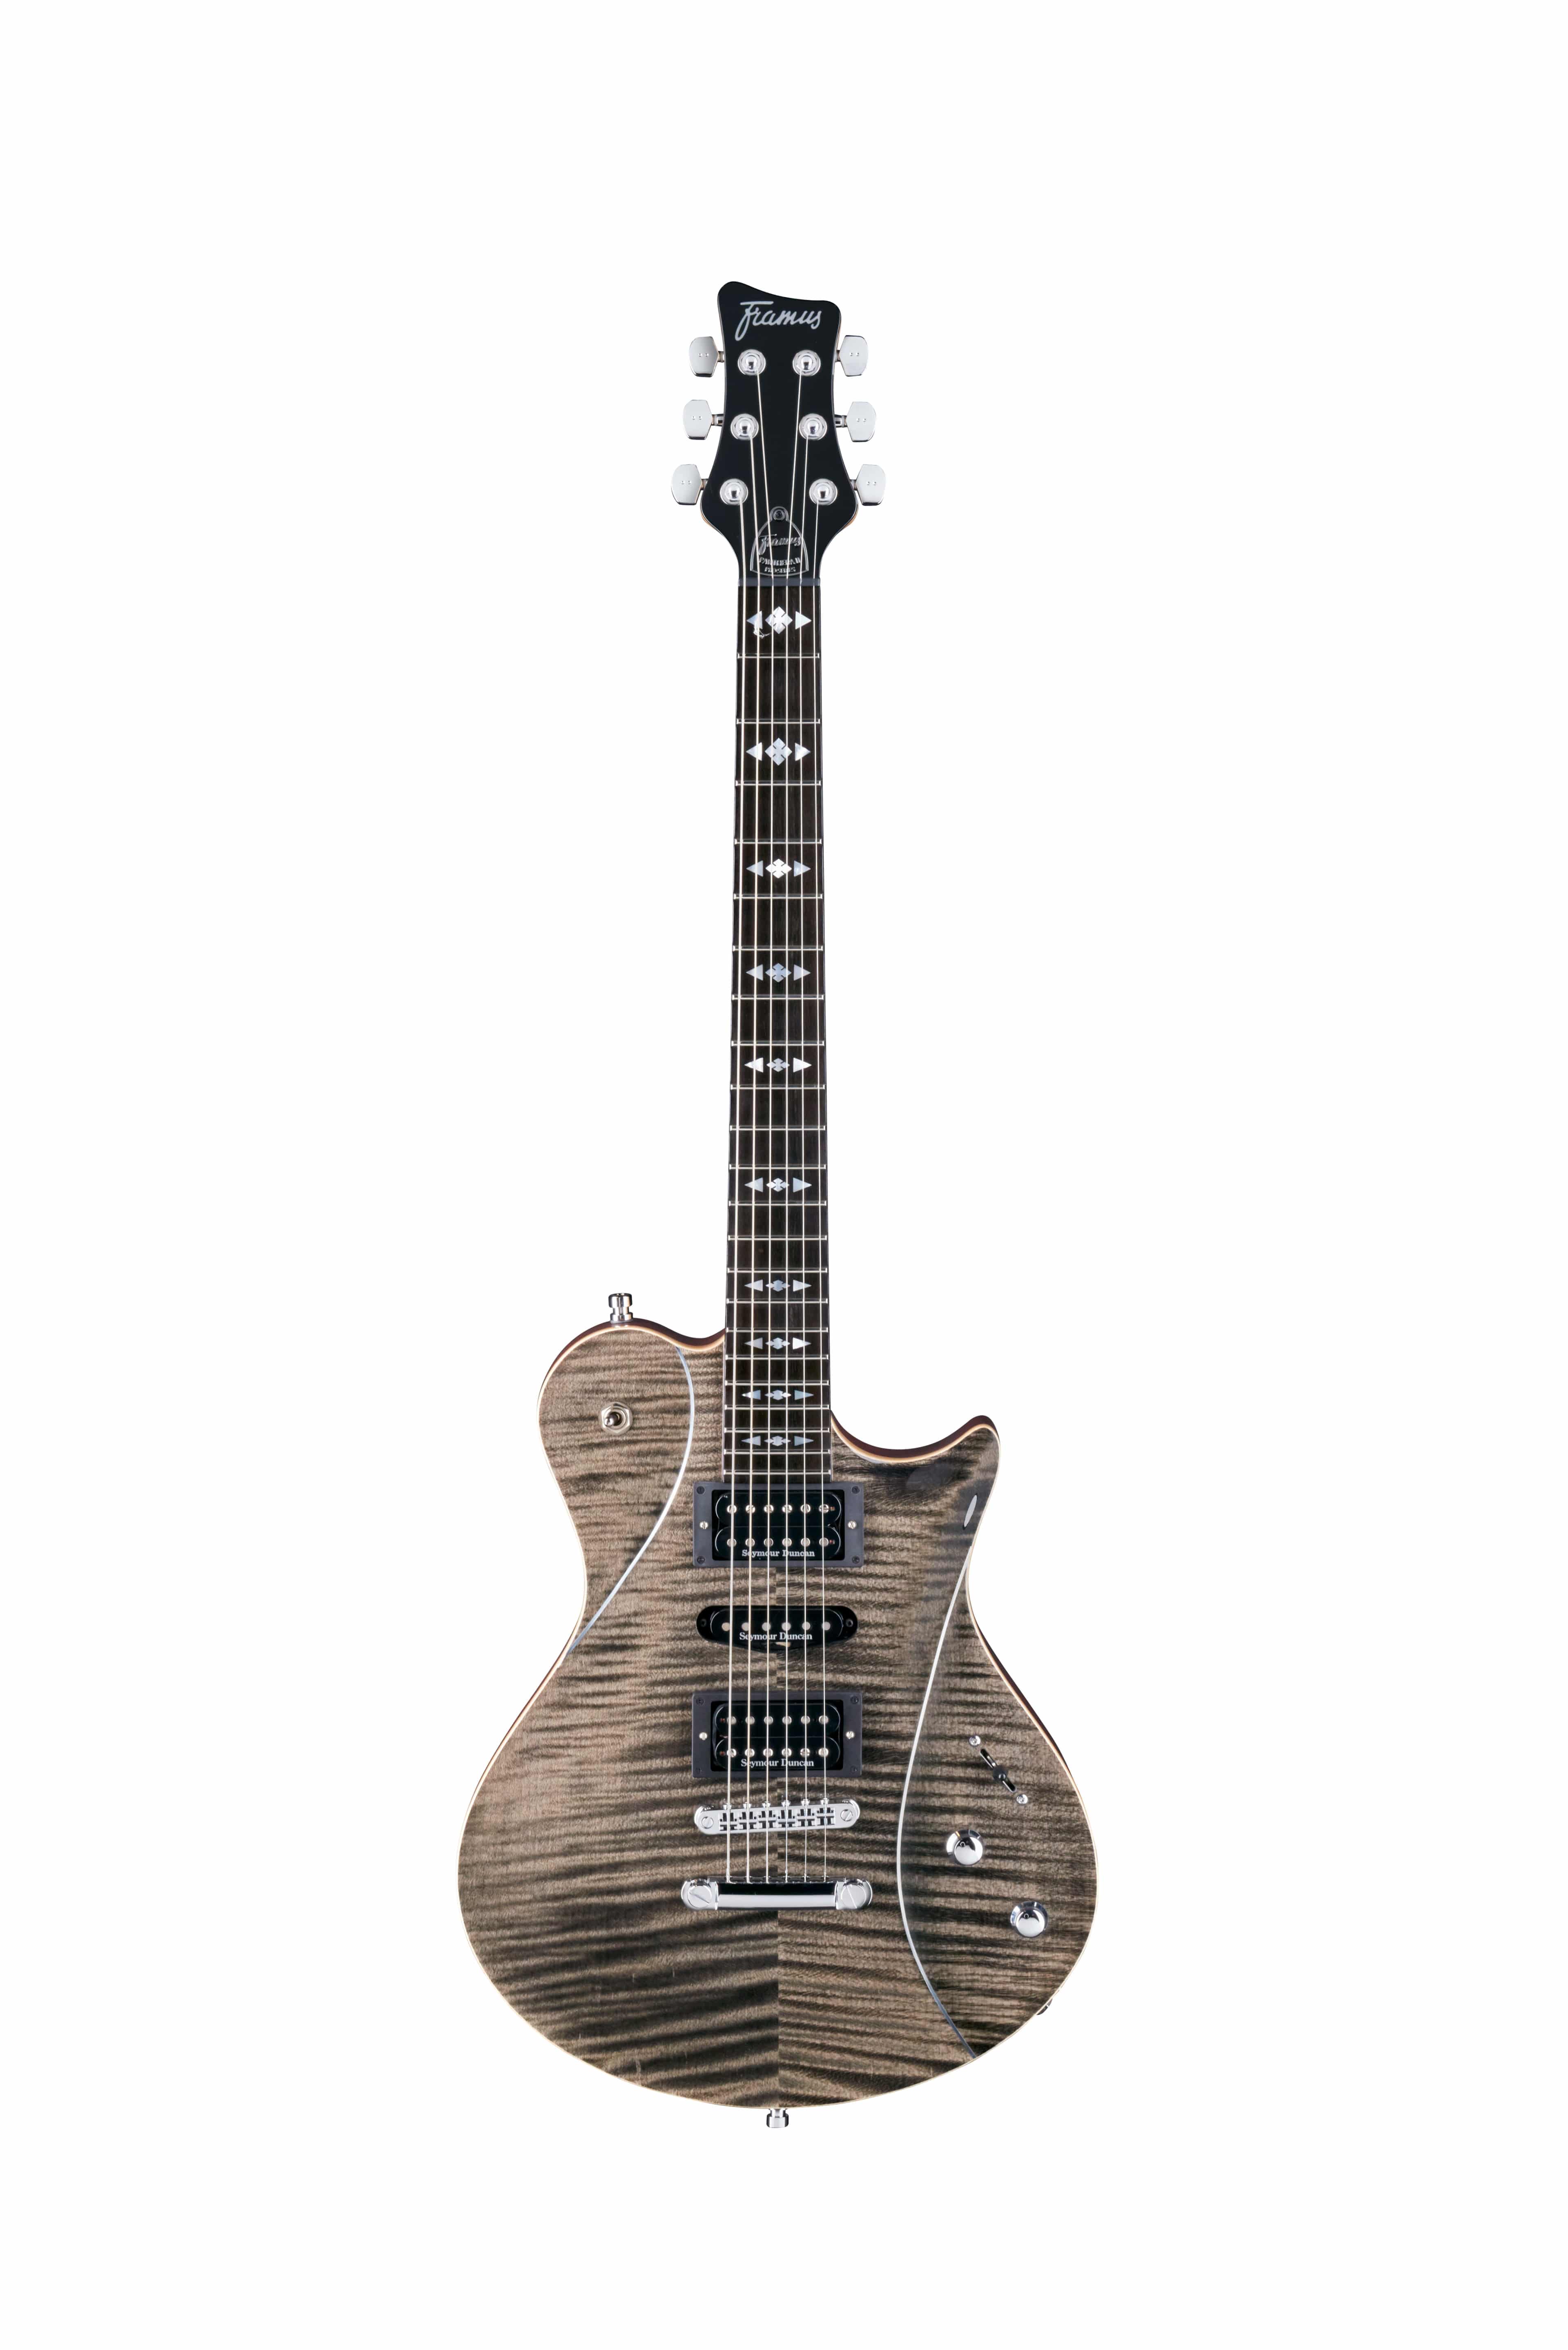 Framus Unveils New Remodeled Guitars For 2019